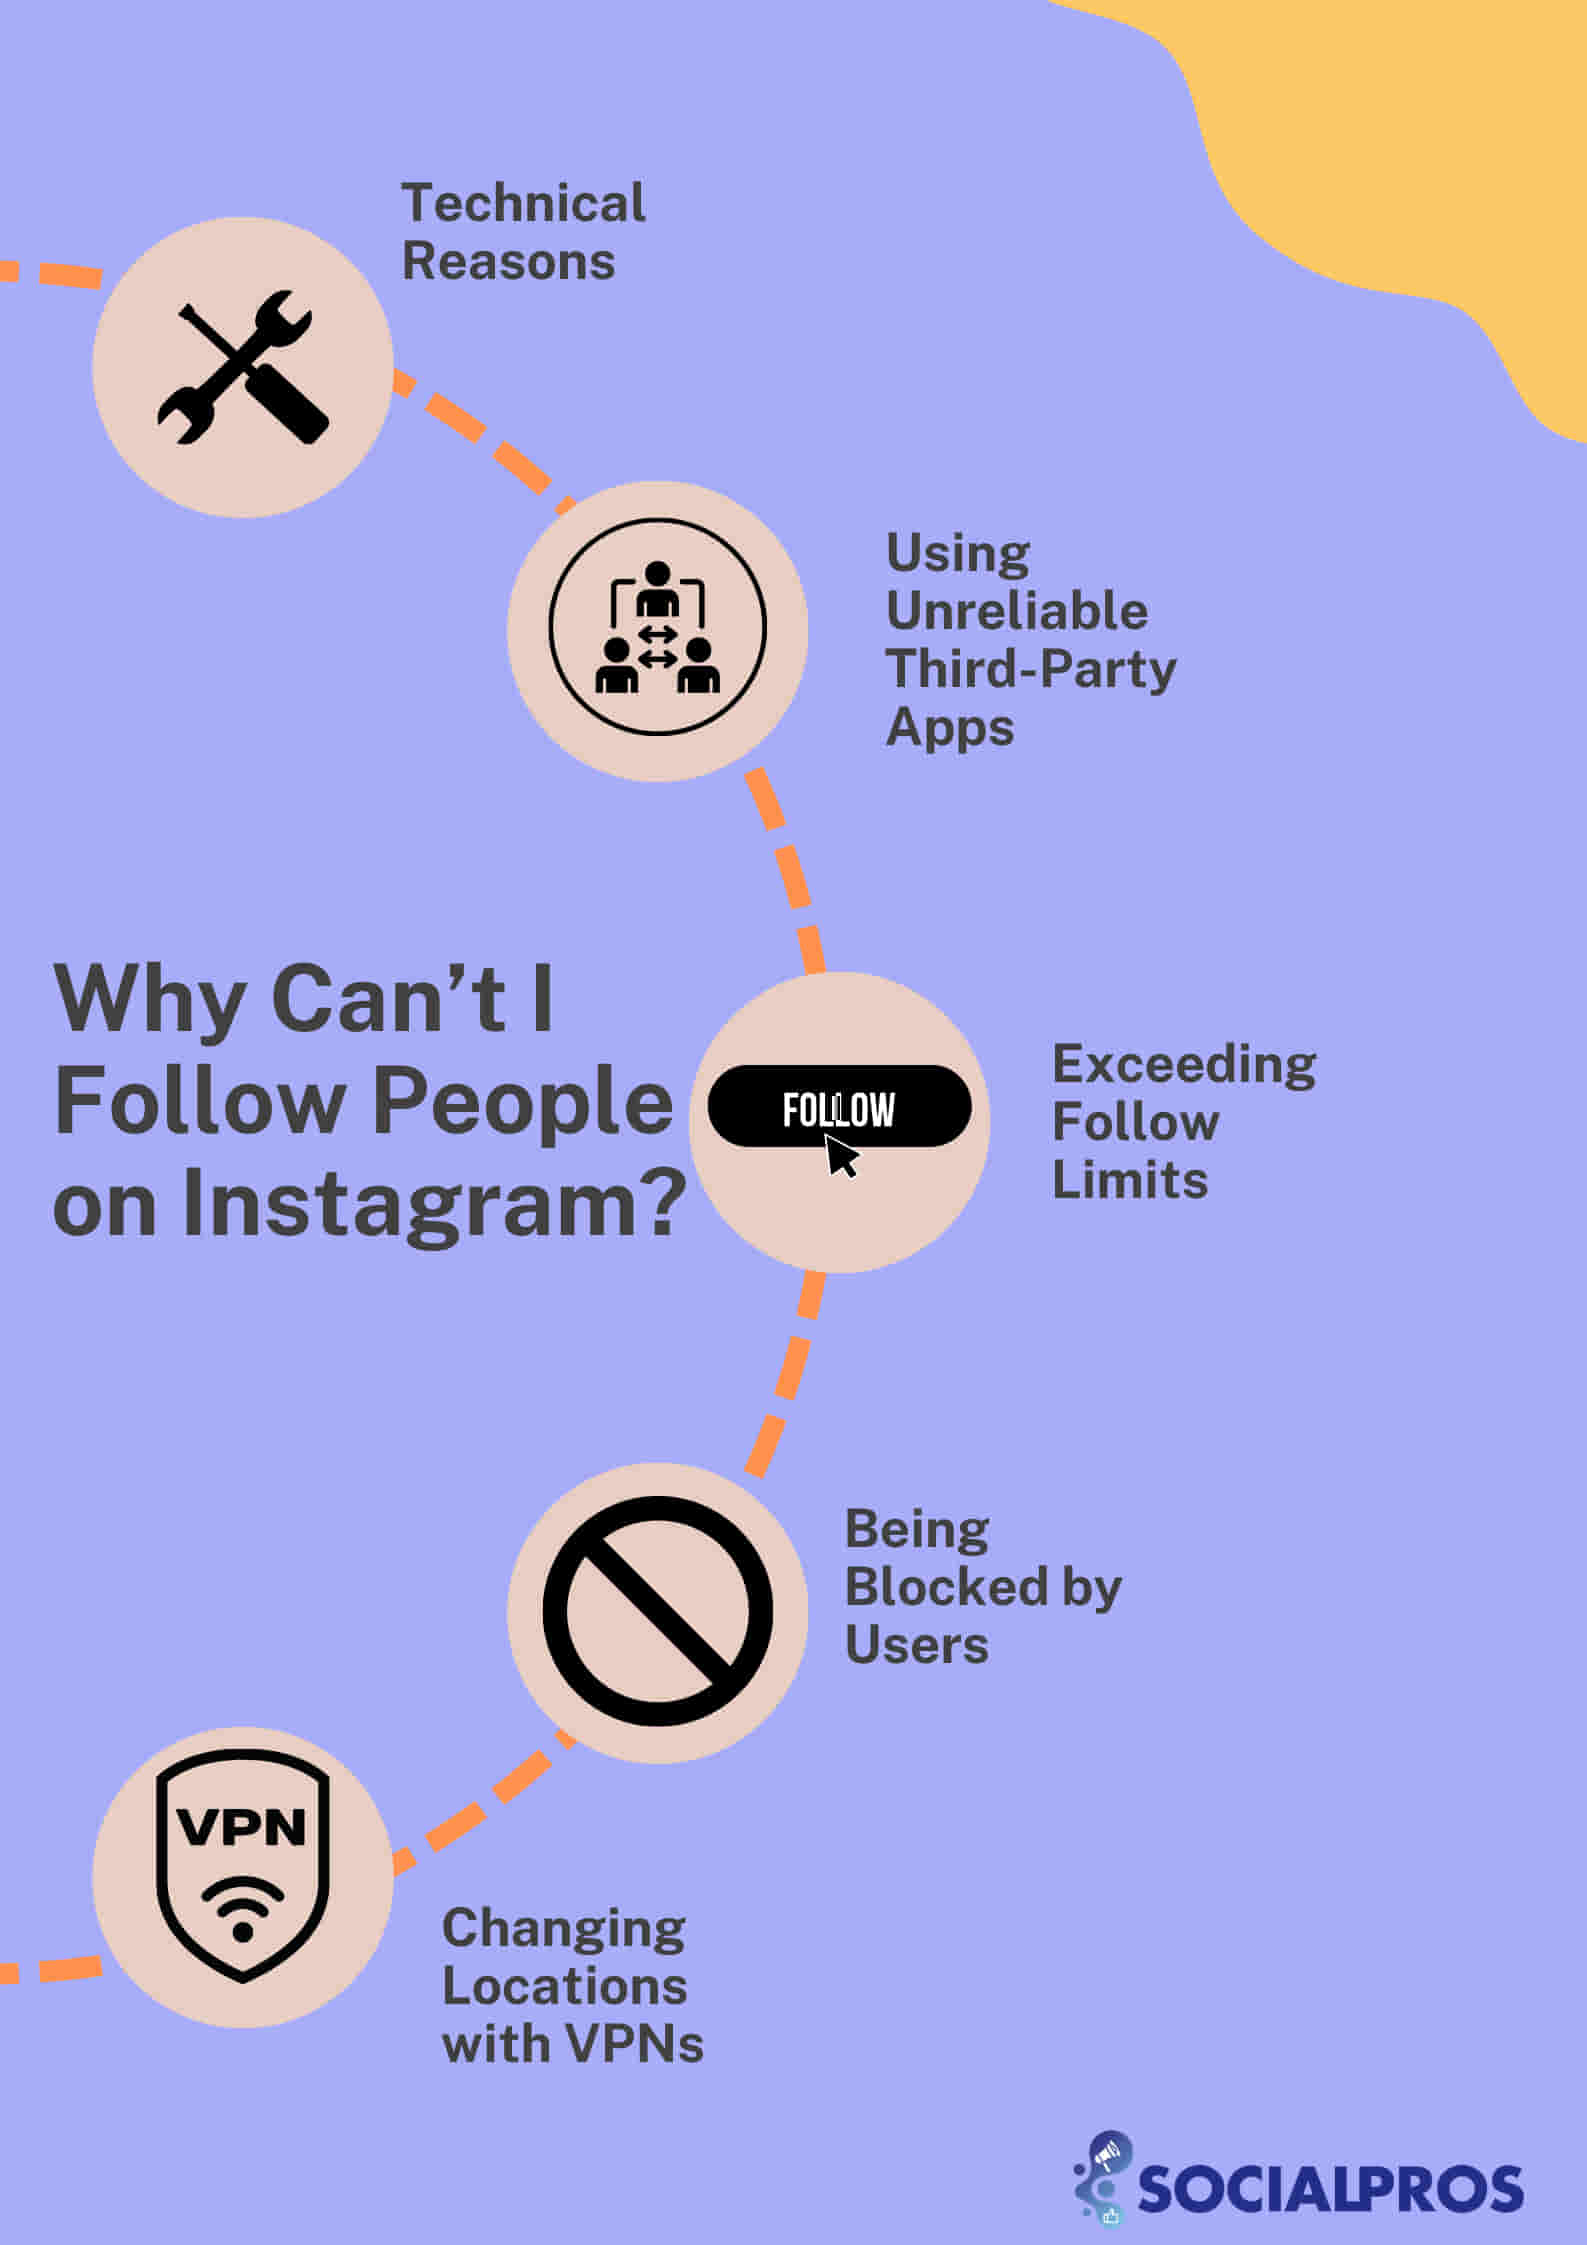 Why Can’t I Follow People on Instagram?